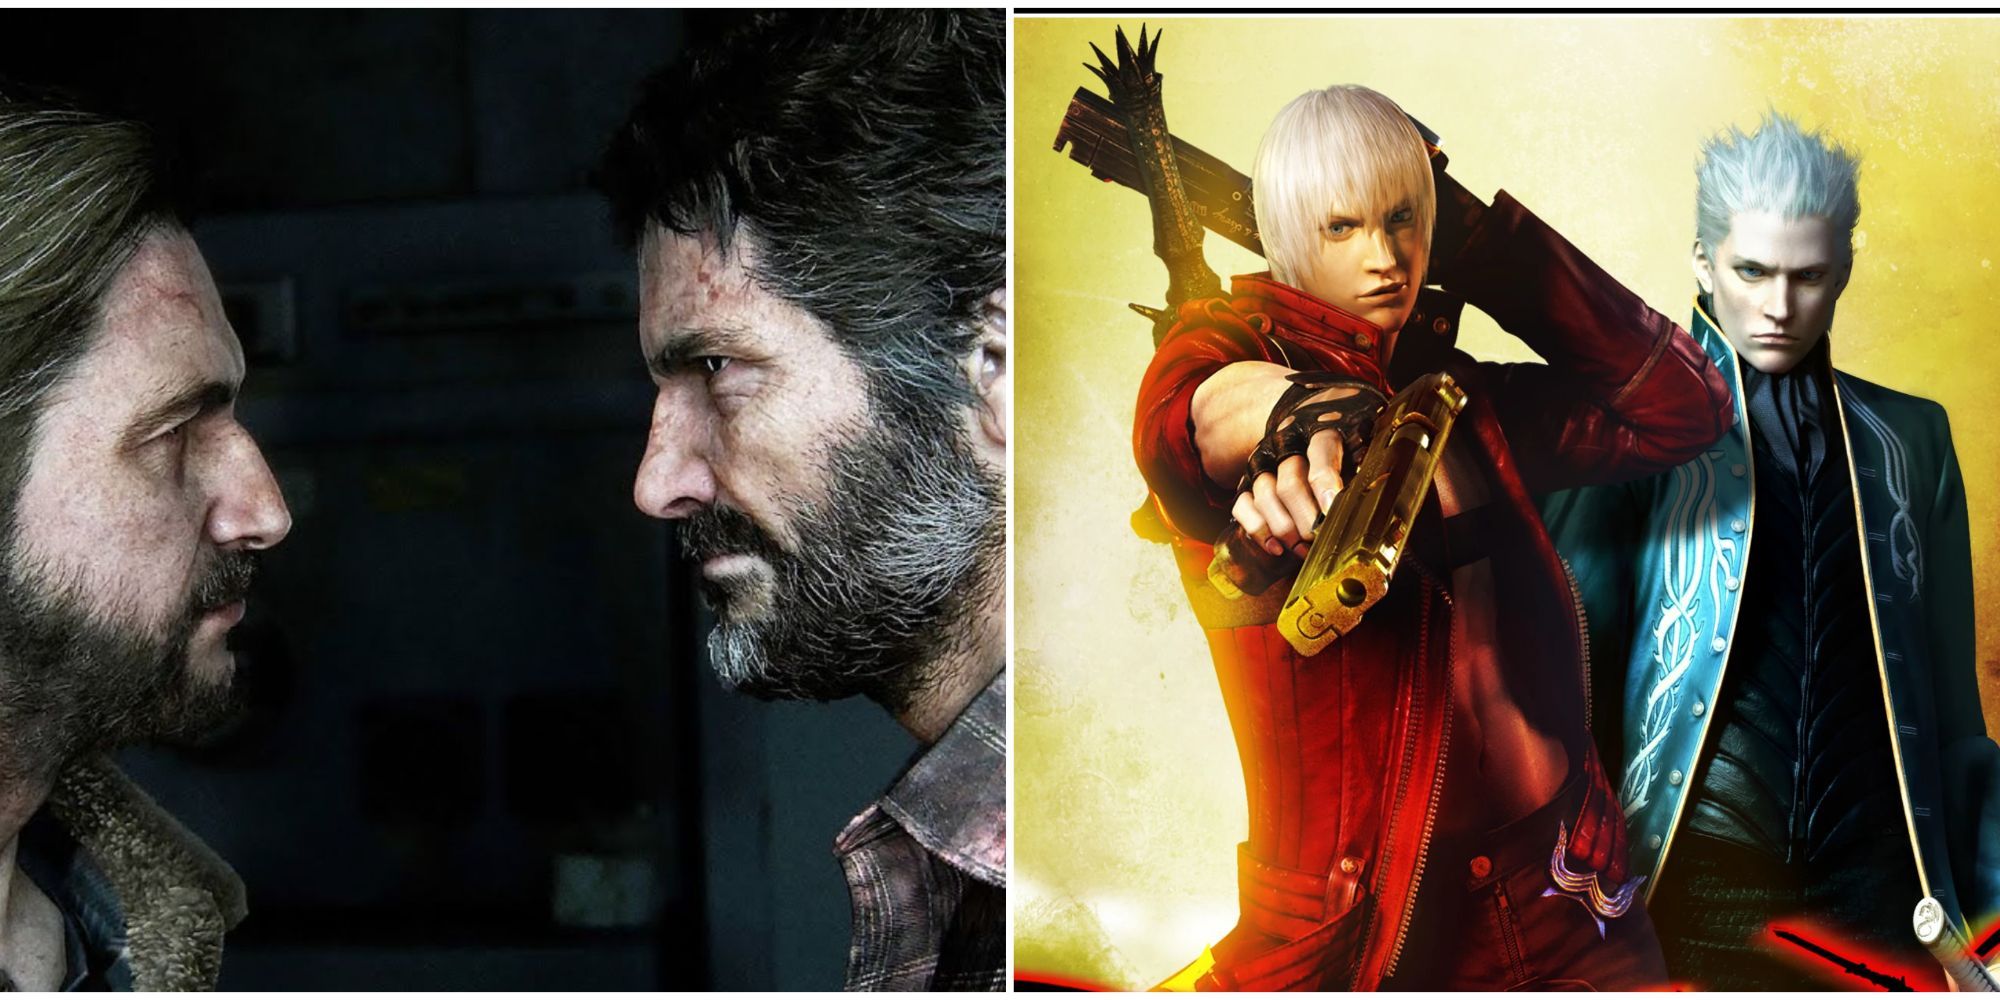 10 Best Video Game Brothers: Joel and Tommy from The Last of Us, beside Vergil and Dante from Devil May Cry